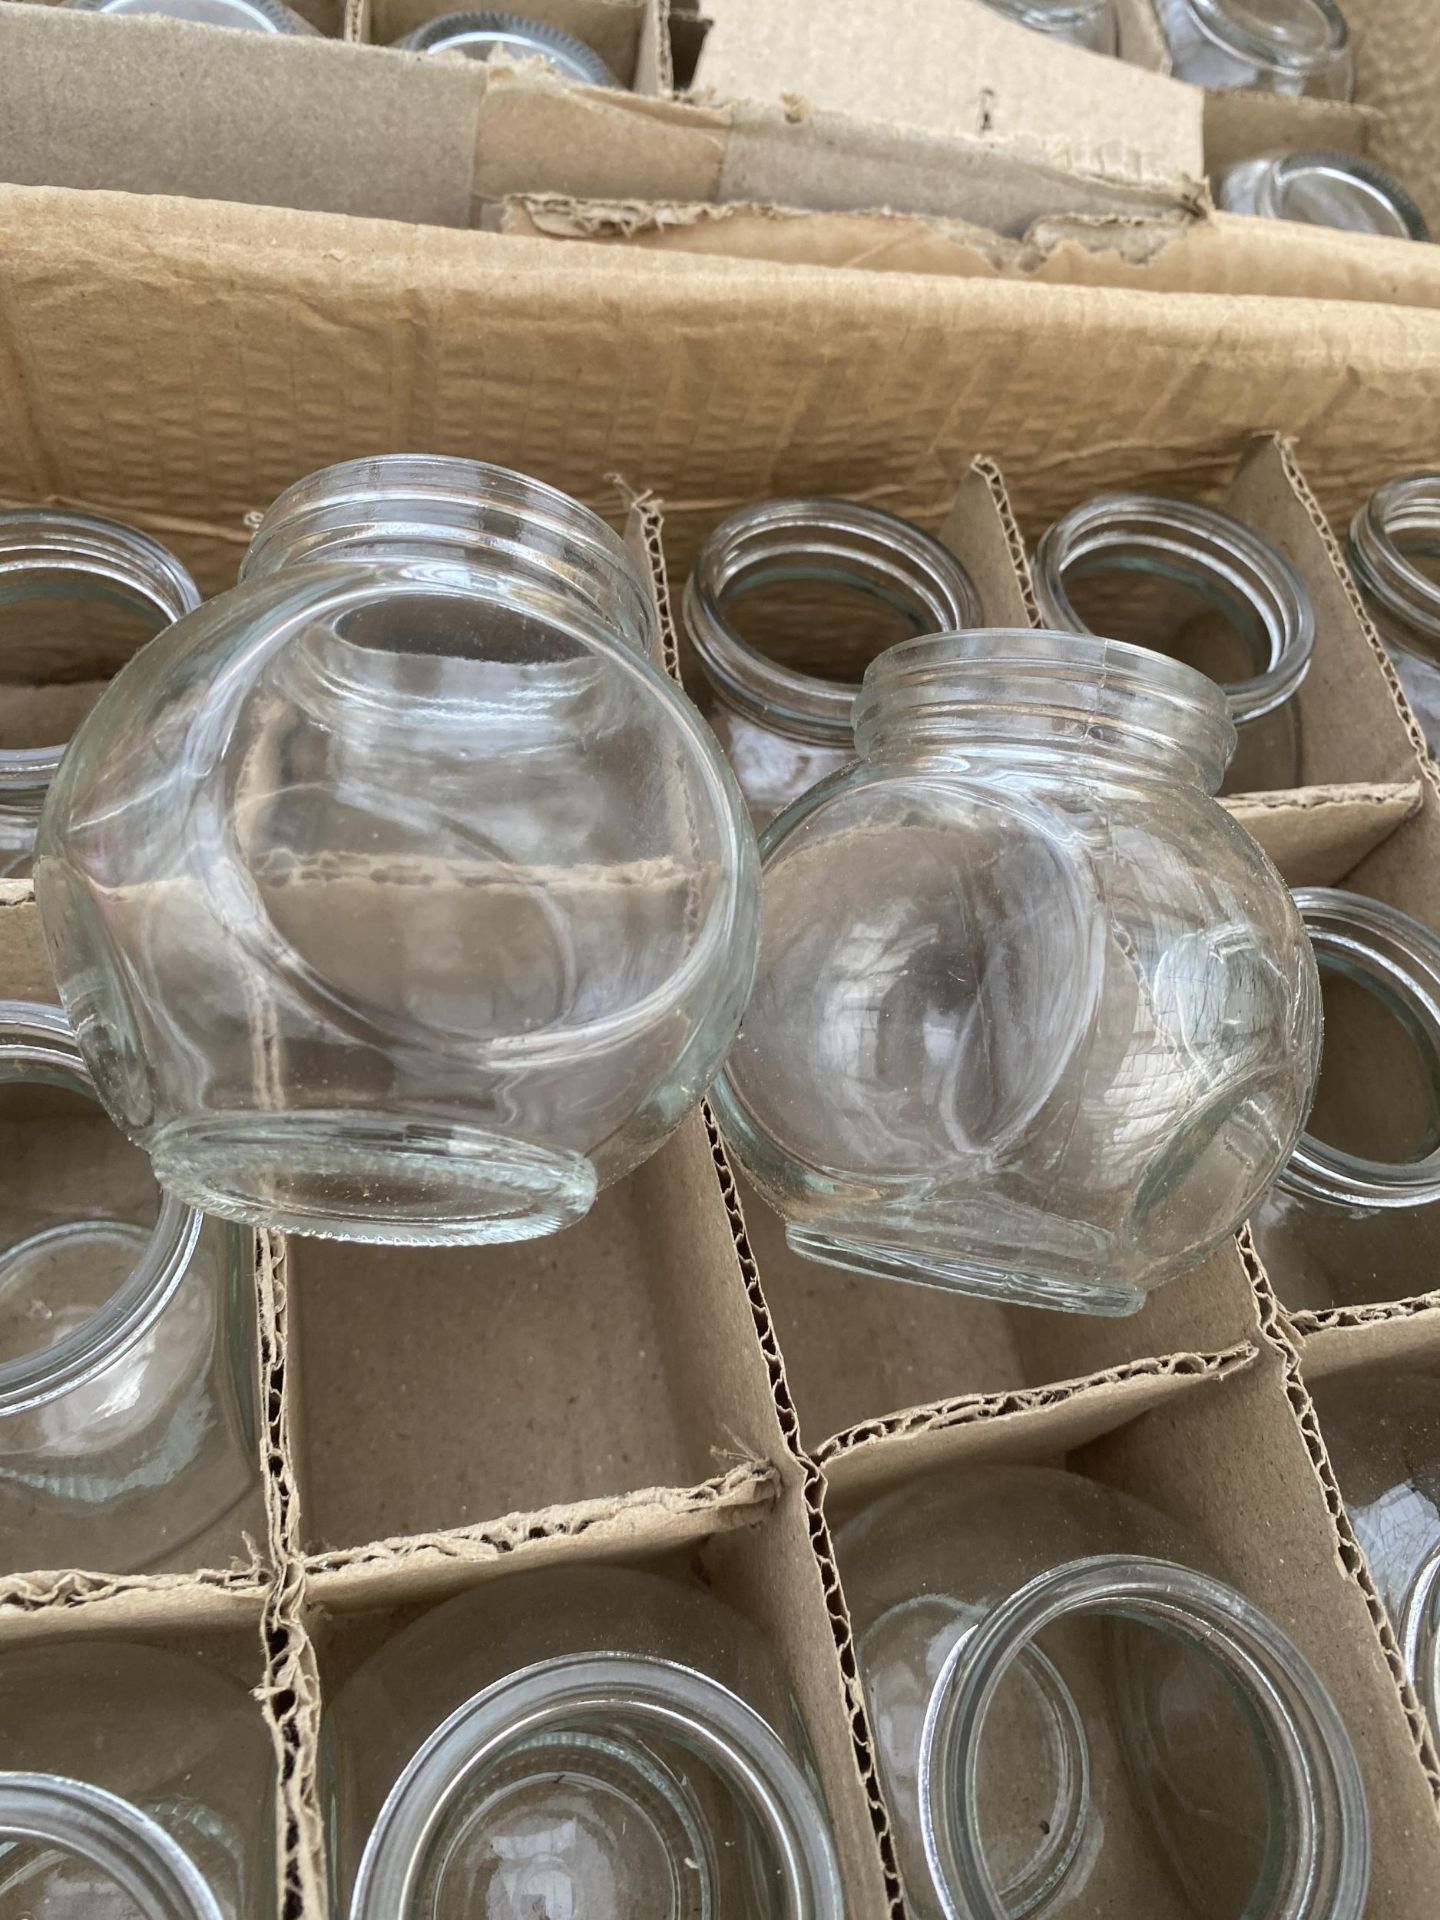 A LARGE QUANTITY OF AS NEW SMALL GLASS JARS - Image 2 of 2